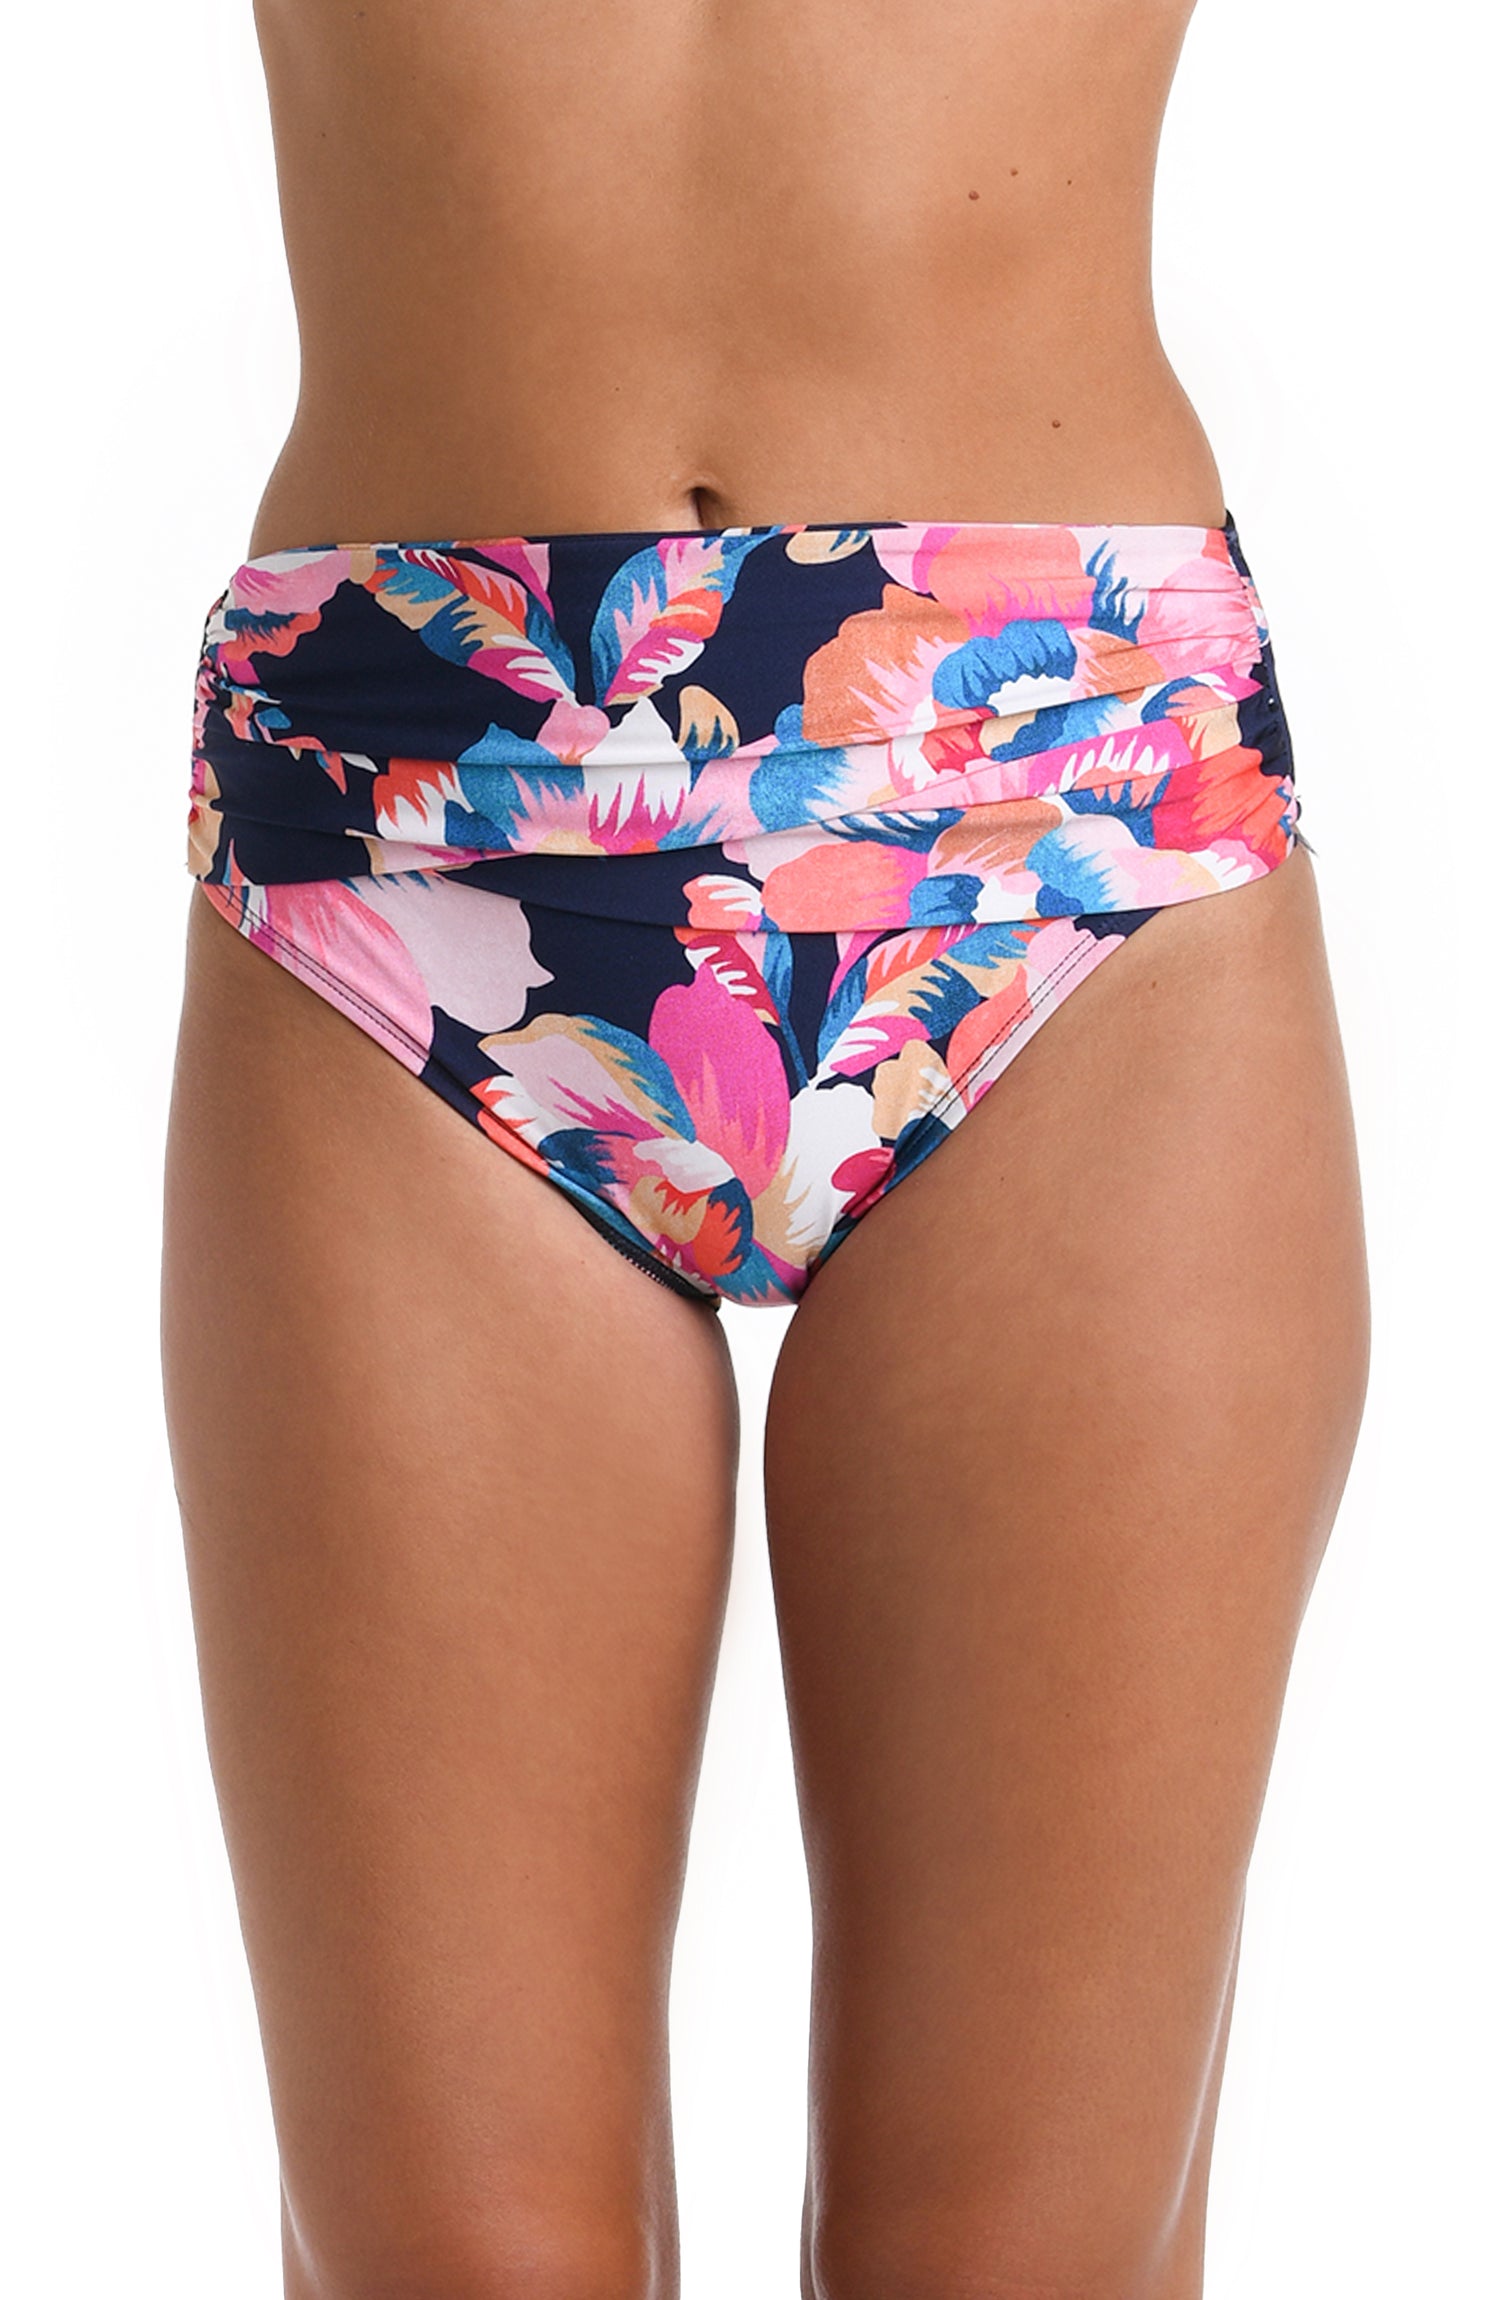 Model is wearing a multicolored Mid Waist Sash Band Swimsuit Bottom